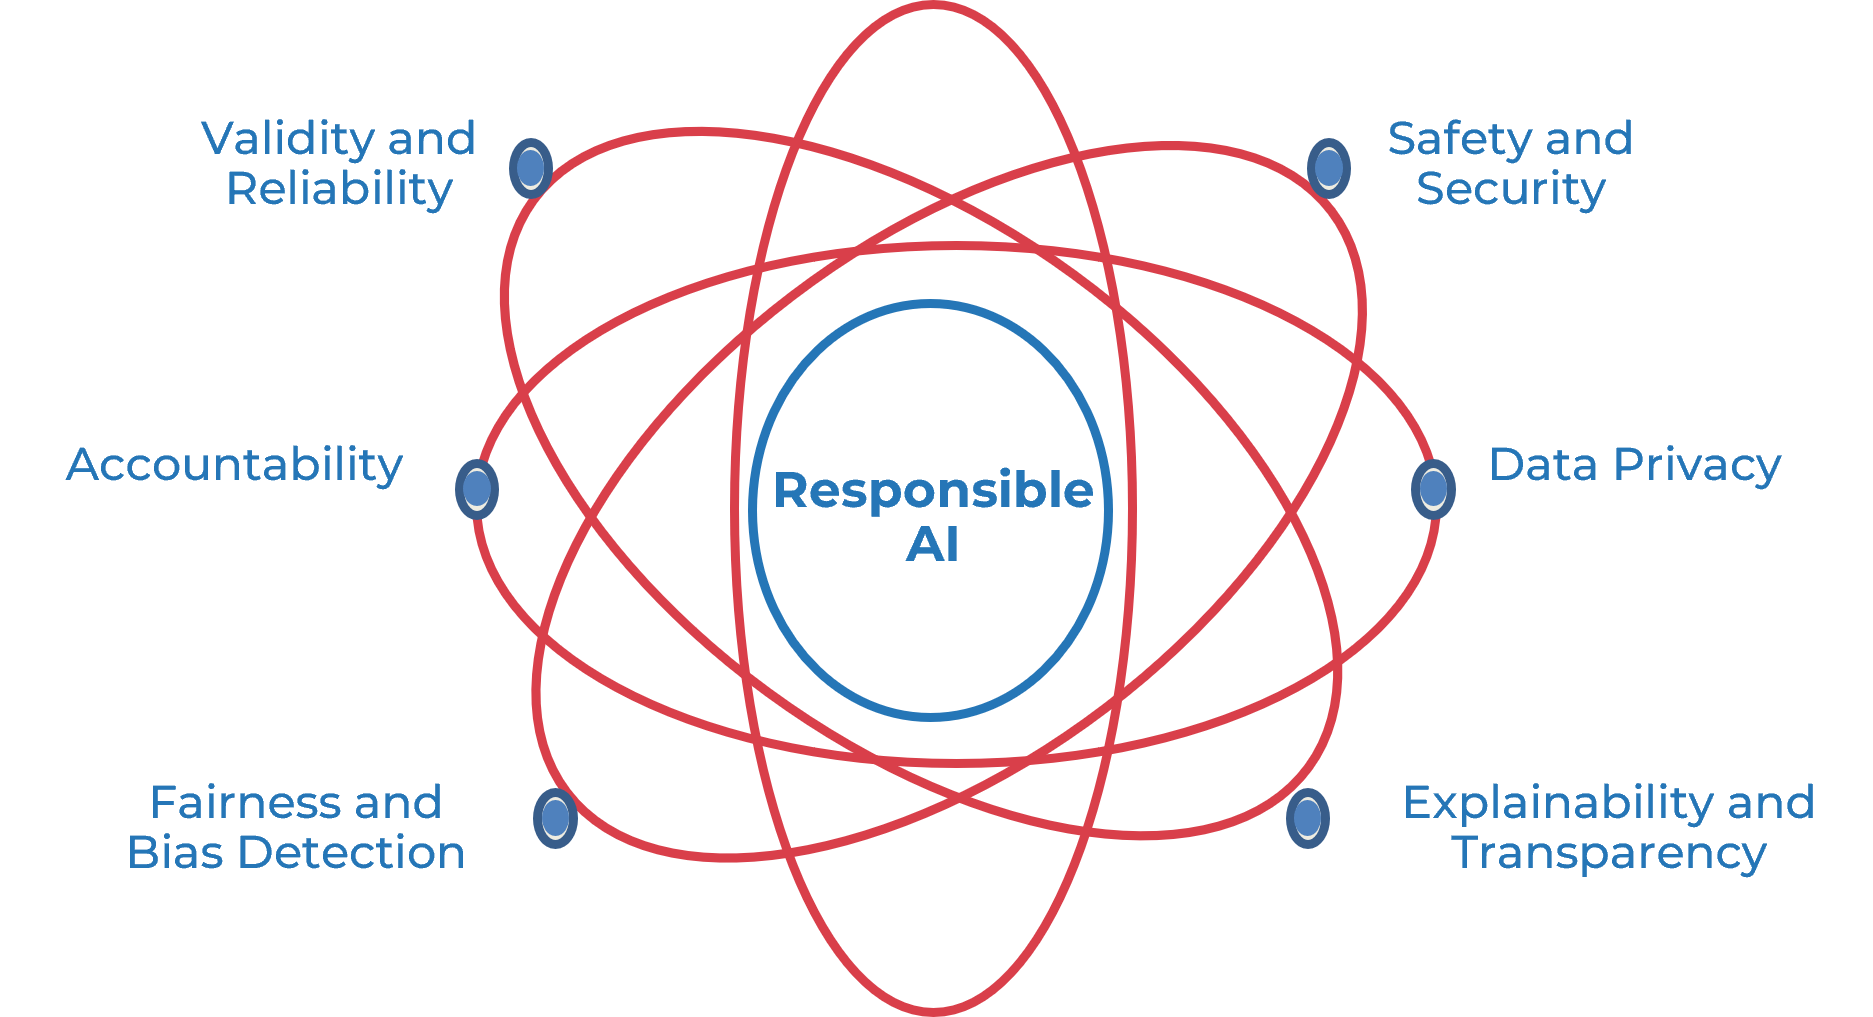 Orbital diagram with 'Responsible AI' at the center. Surrounding it in oval orbits are 'Data Privacy', 'Fairness and Bias Detection', 'Explainability and Transparency', 'Safety and Security', 'Validity and Reliability', and 'Accountability'.